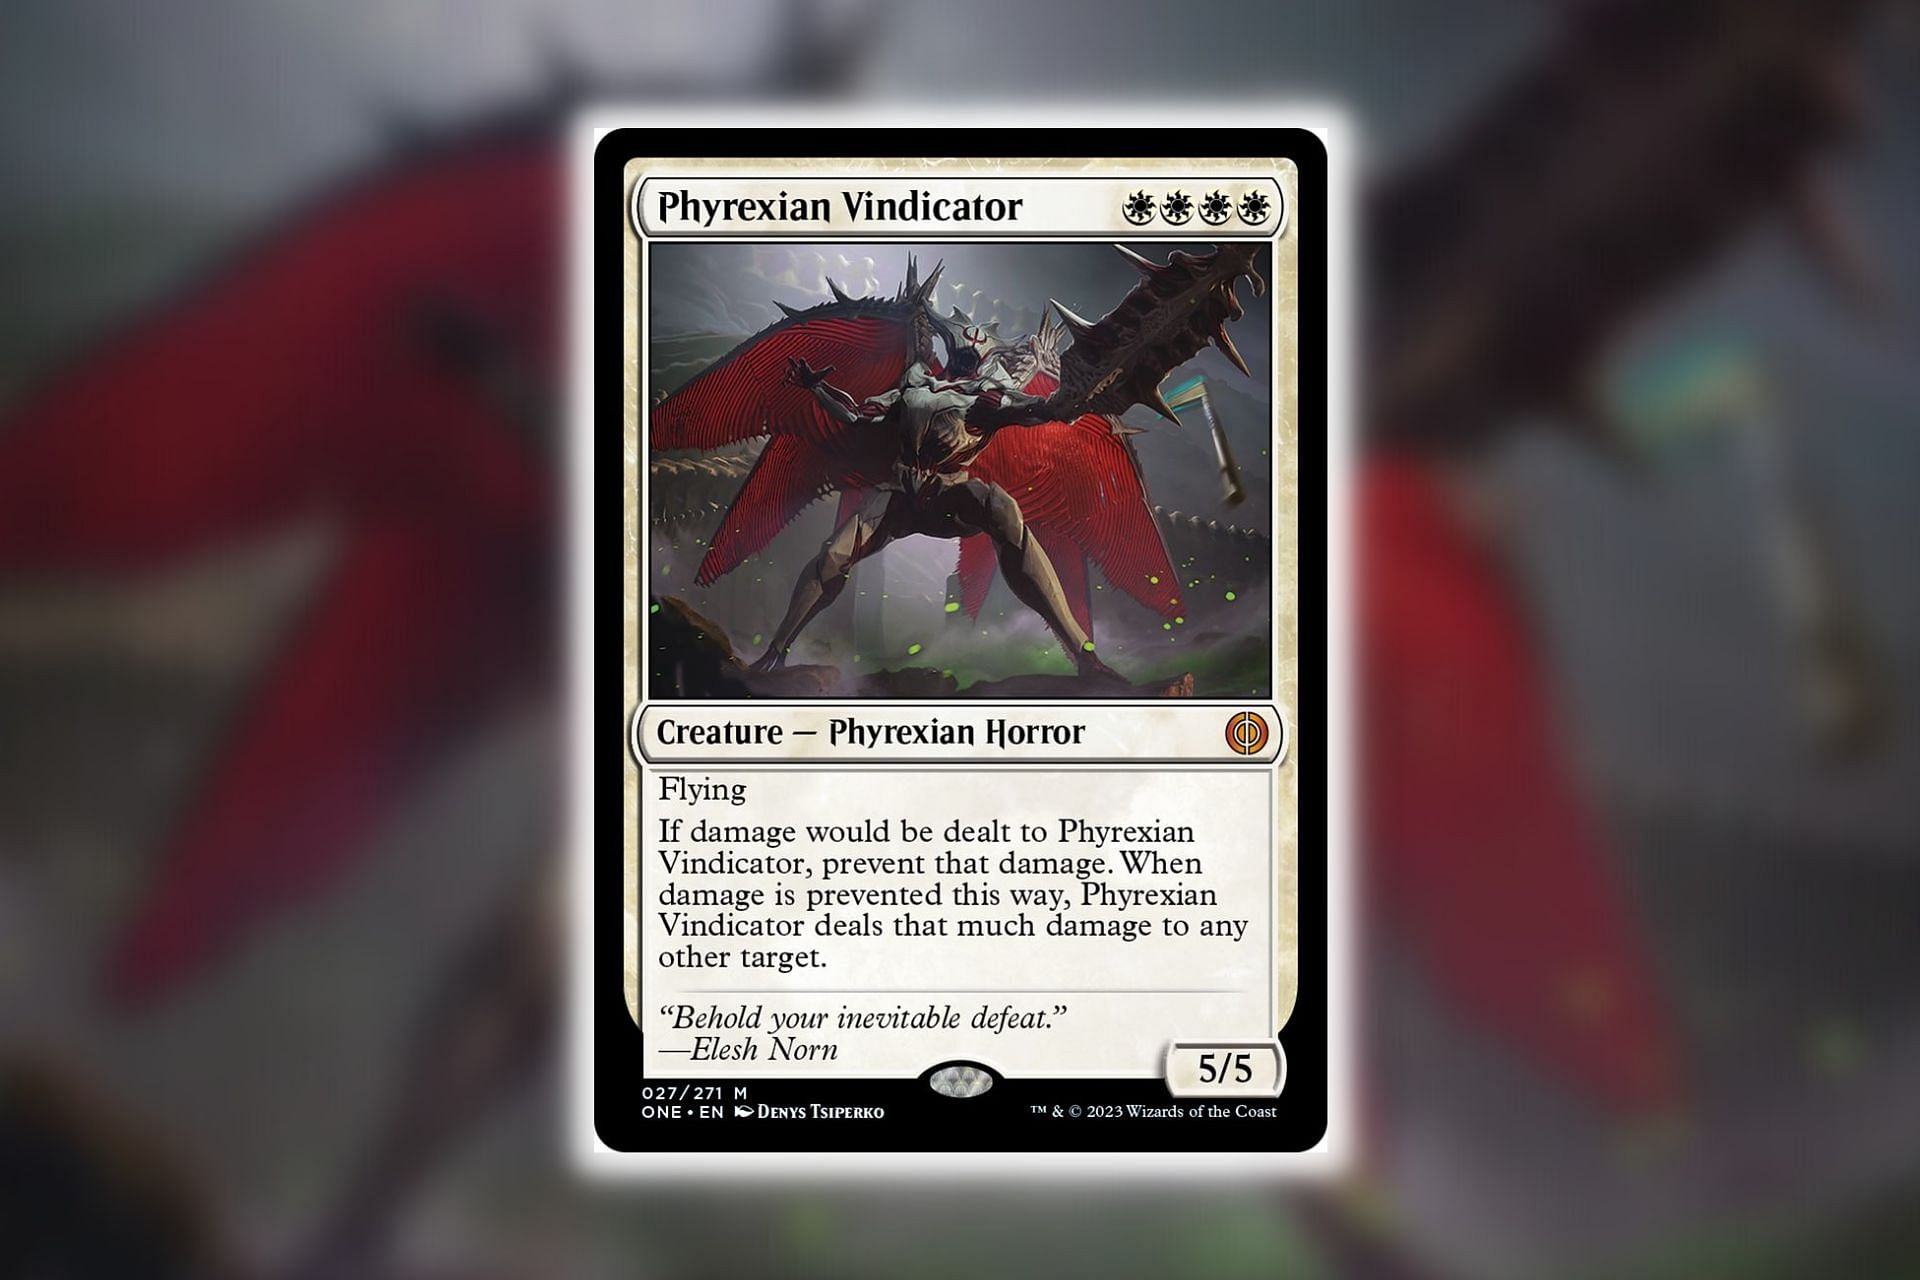 Phyrexian Vindicator in Magic: The Gathering (Image via Wizards of the Coast)